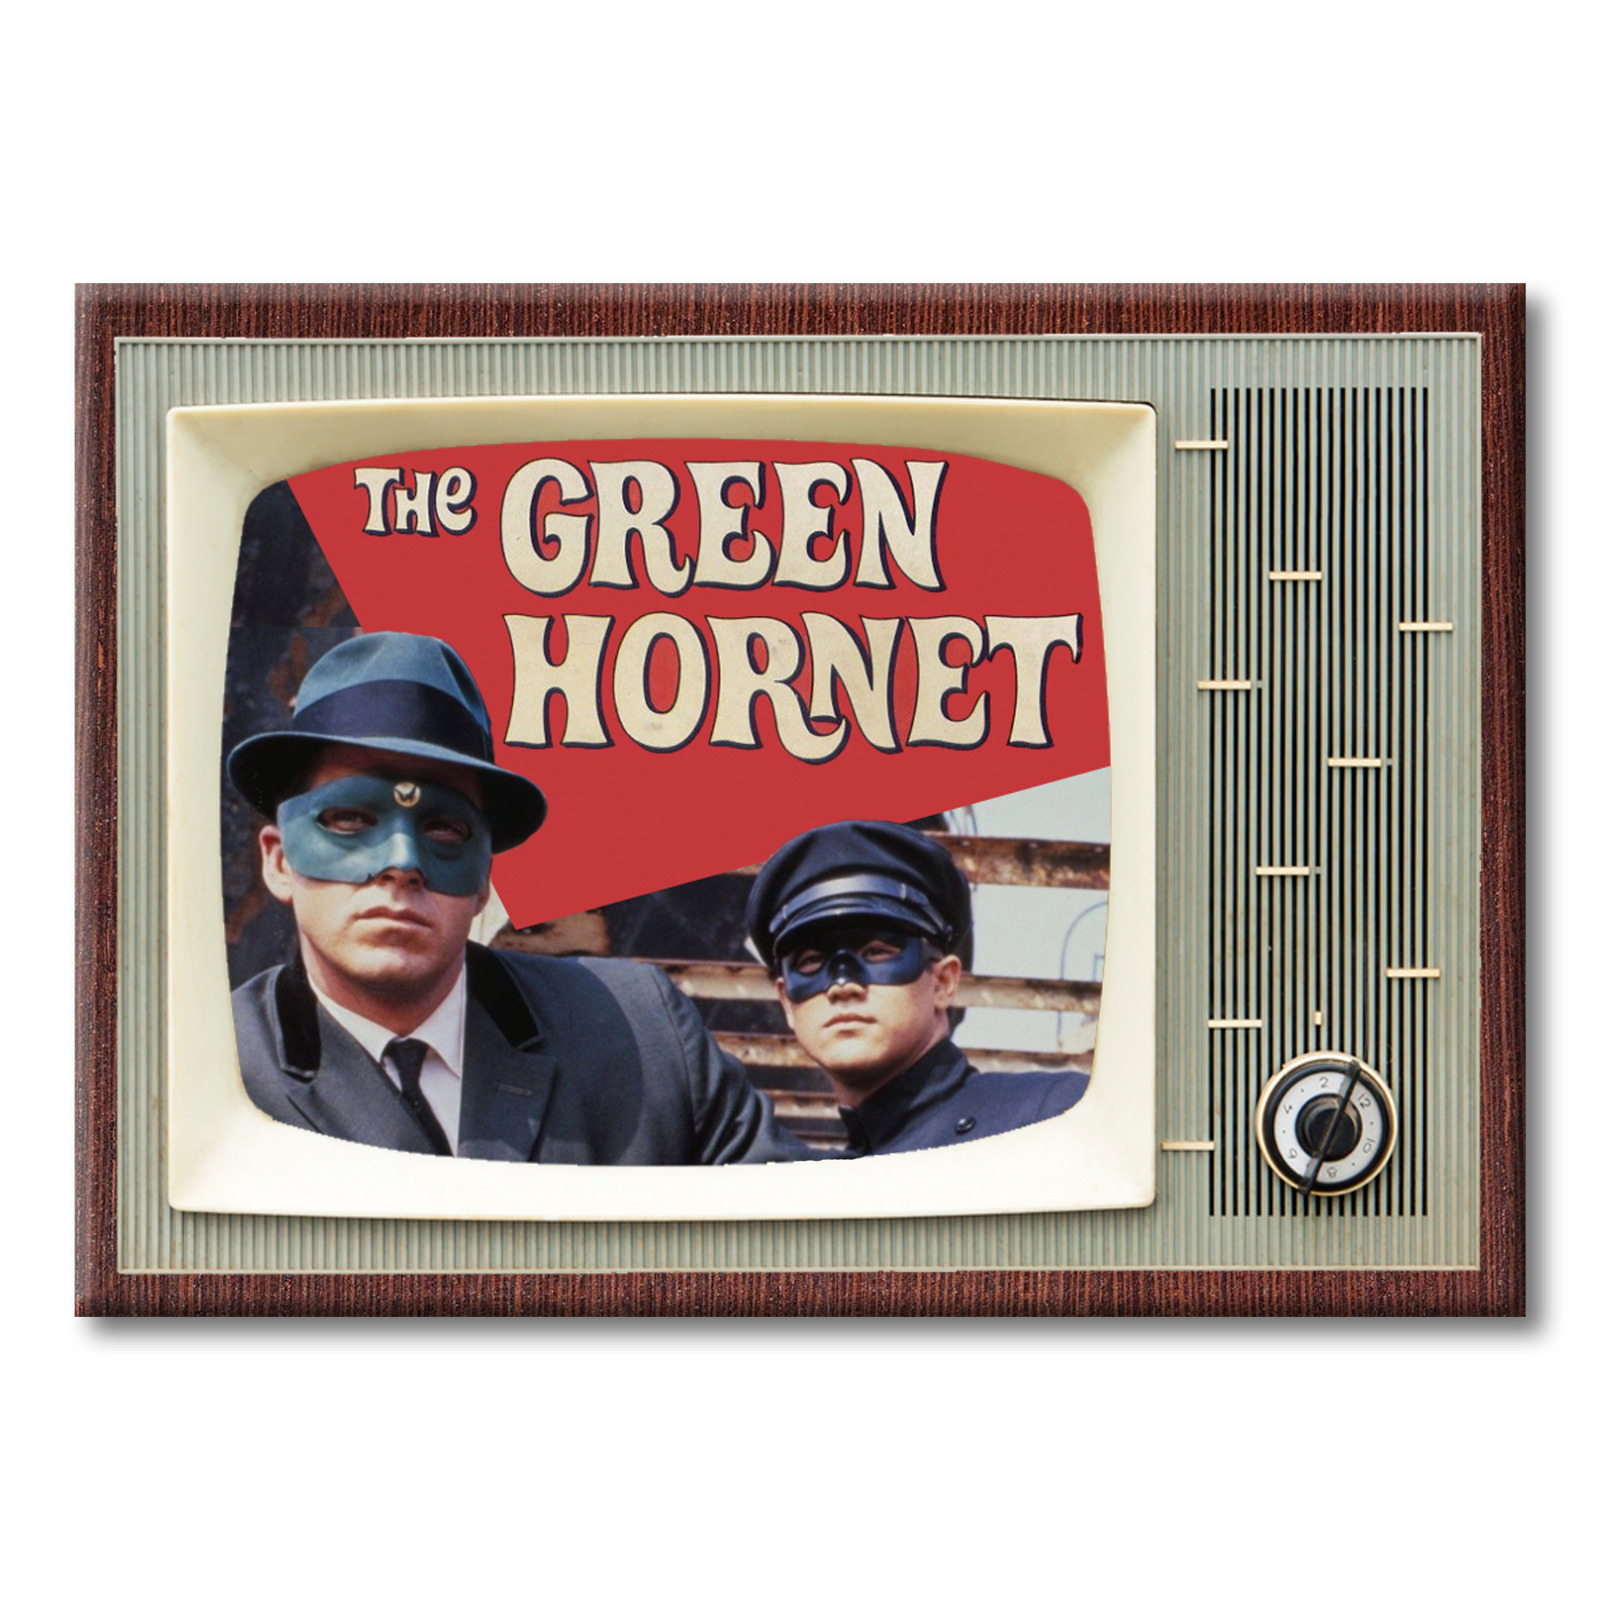 THE GREEN HORNET TV Show TV 3.5 inches x 2.5 inches Steel FRIDGE MAGNET